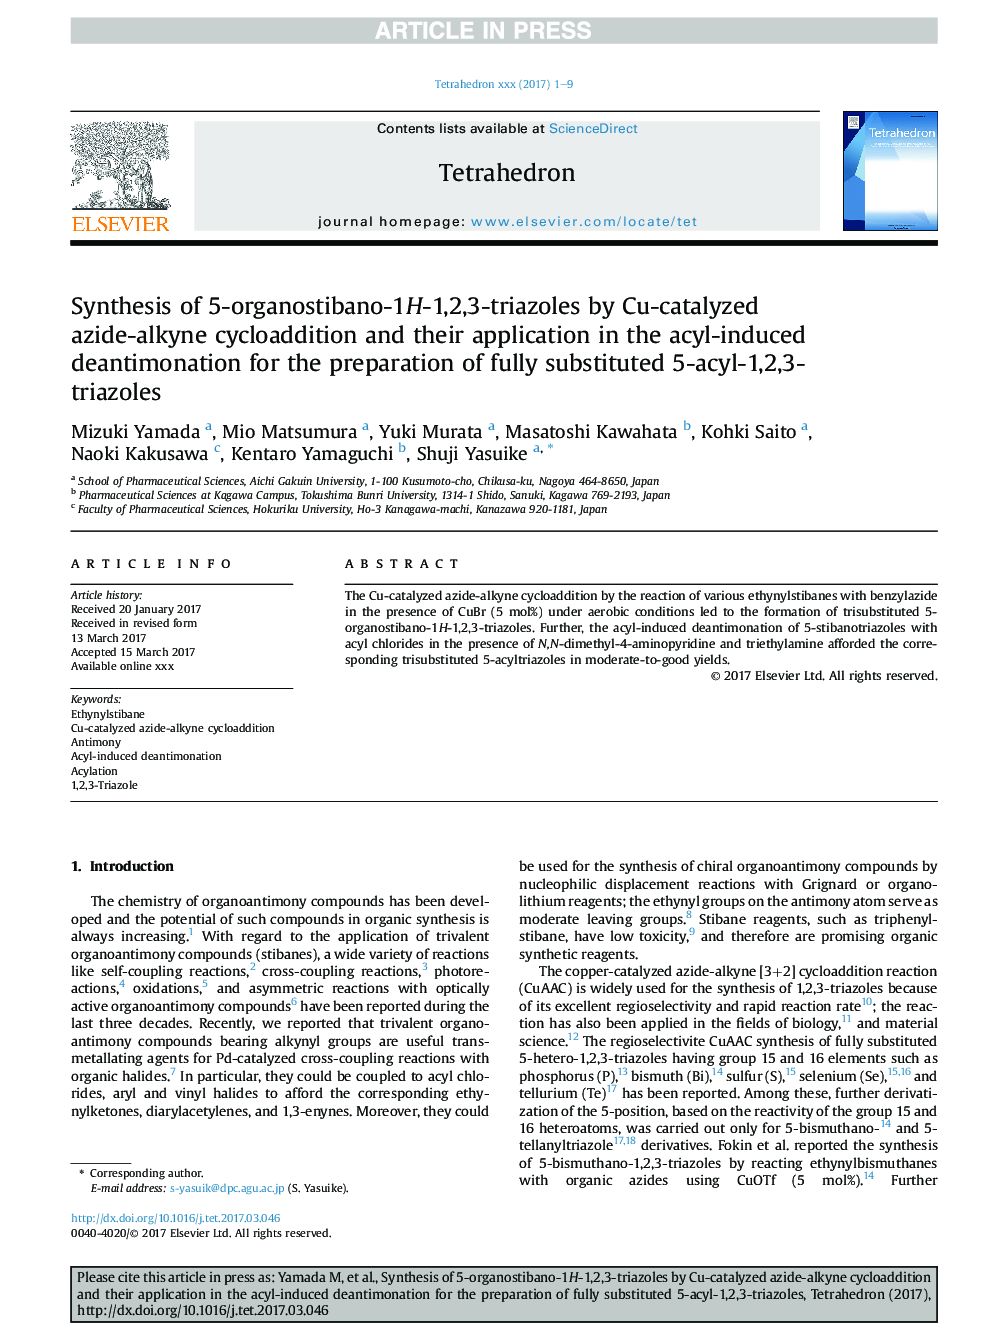 Synthesis of 5-organostibano-1H-1,2,3-triazoles by Cu-catalyzed azide-alkyne cycloaddition and their application in the acyl-induced deantimonation for the preparation of fully substituted 5-acyl-1,2,3-triazoles